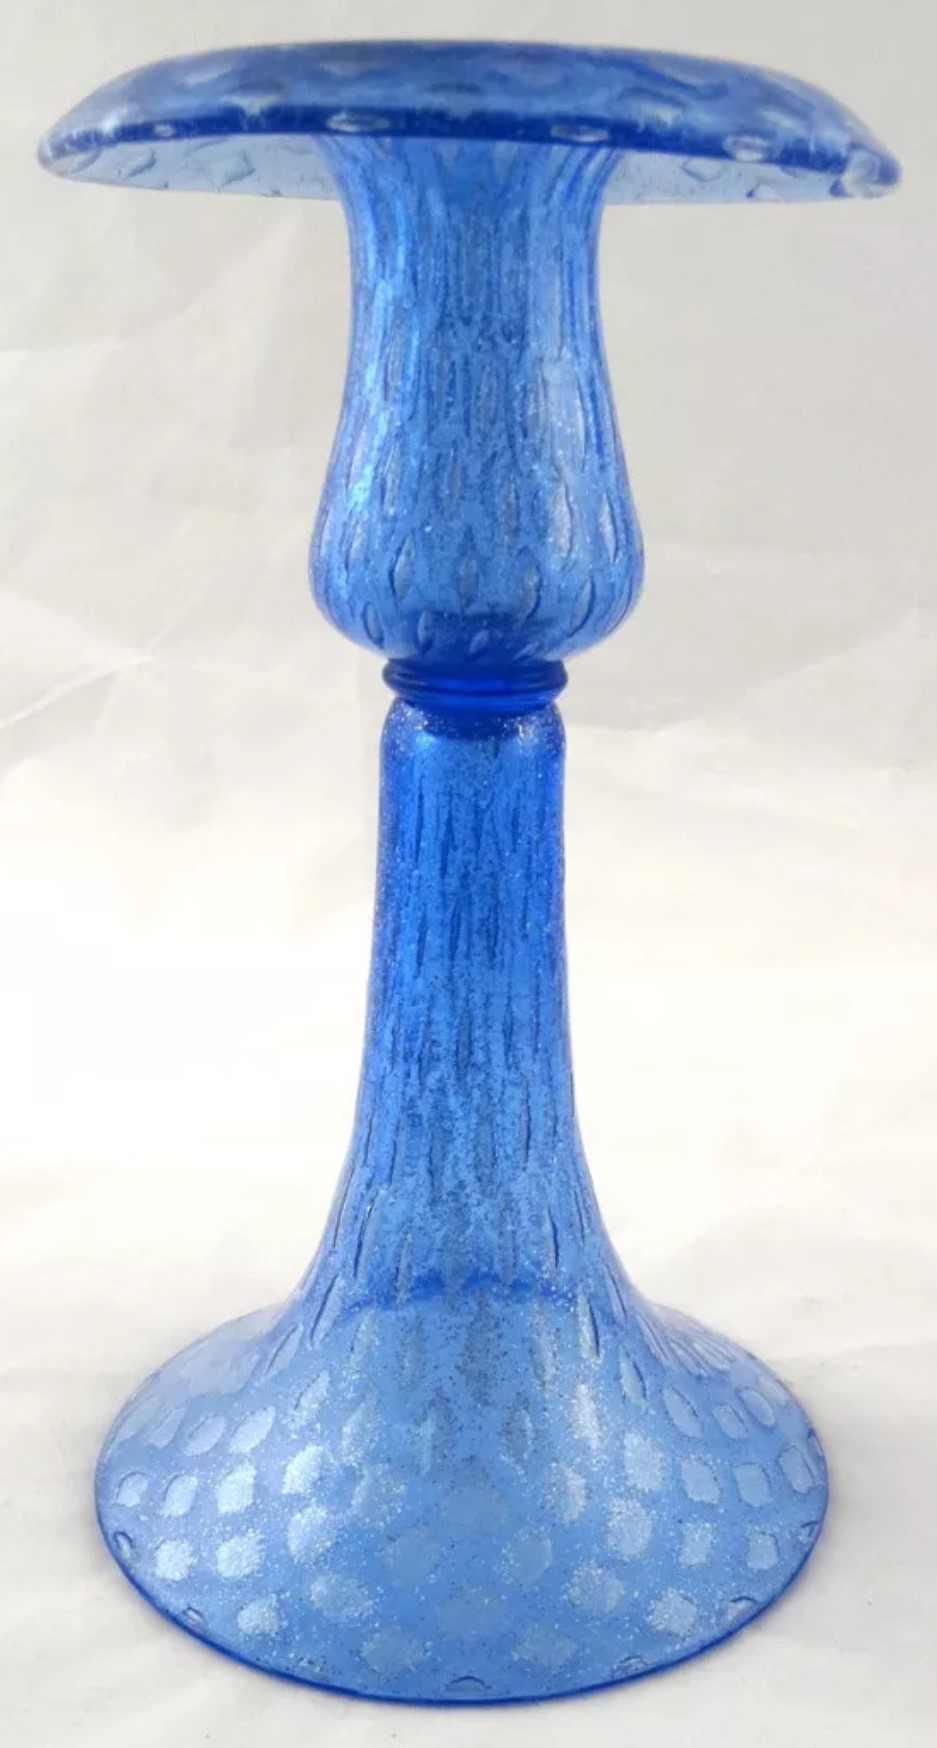 6998 - French Blue Silverina Candlestick